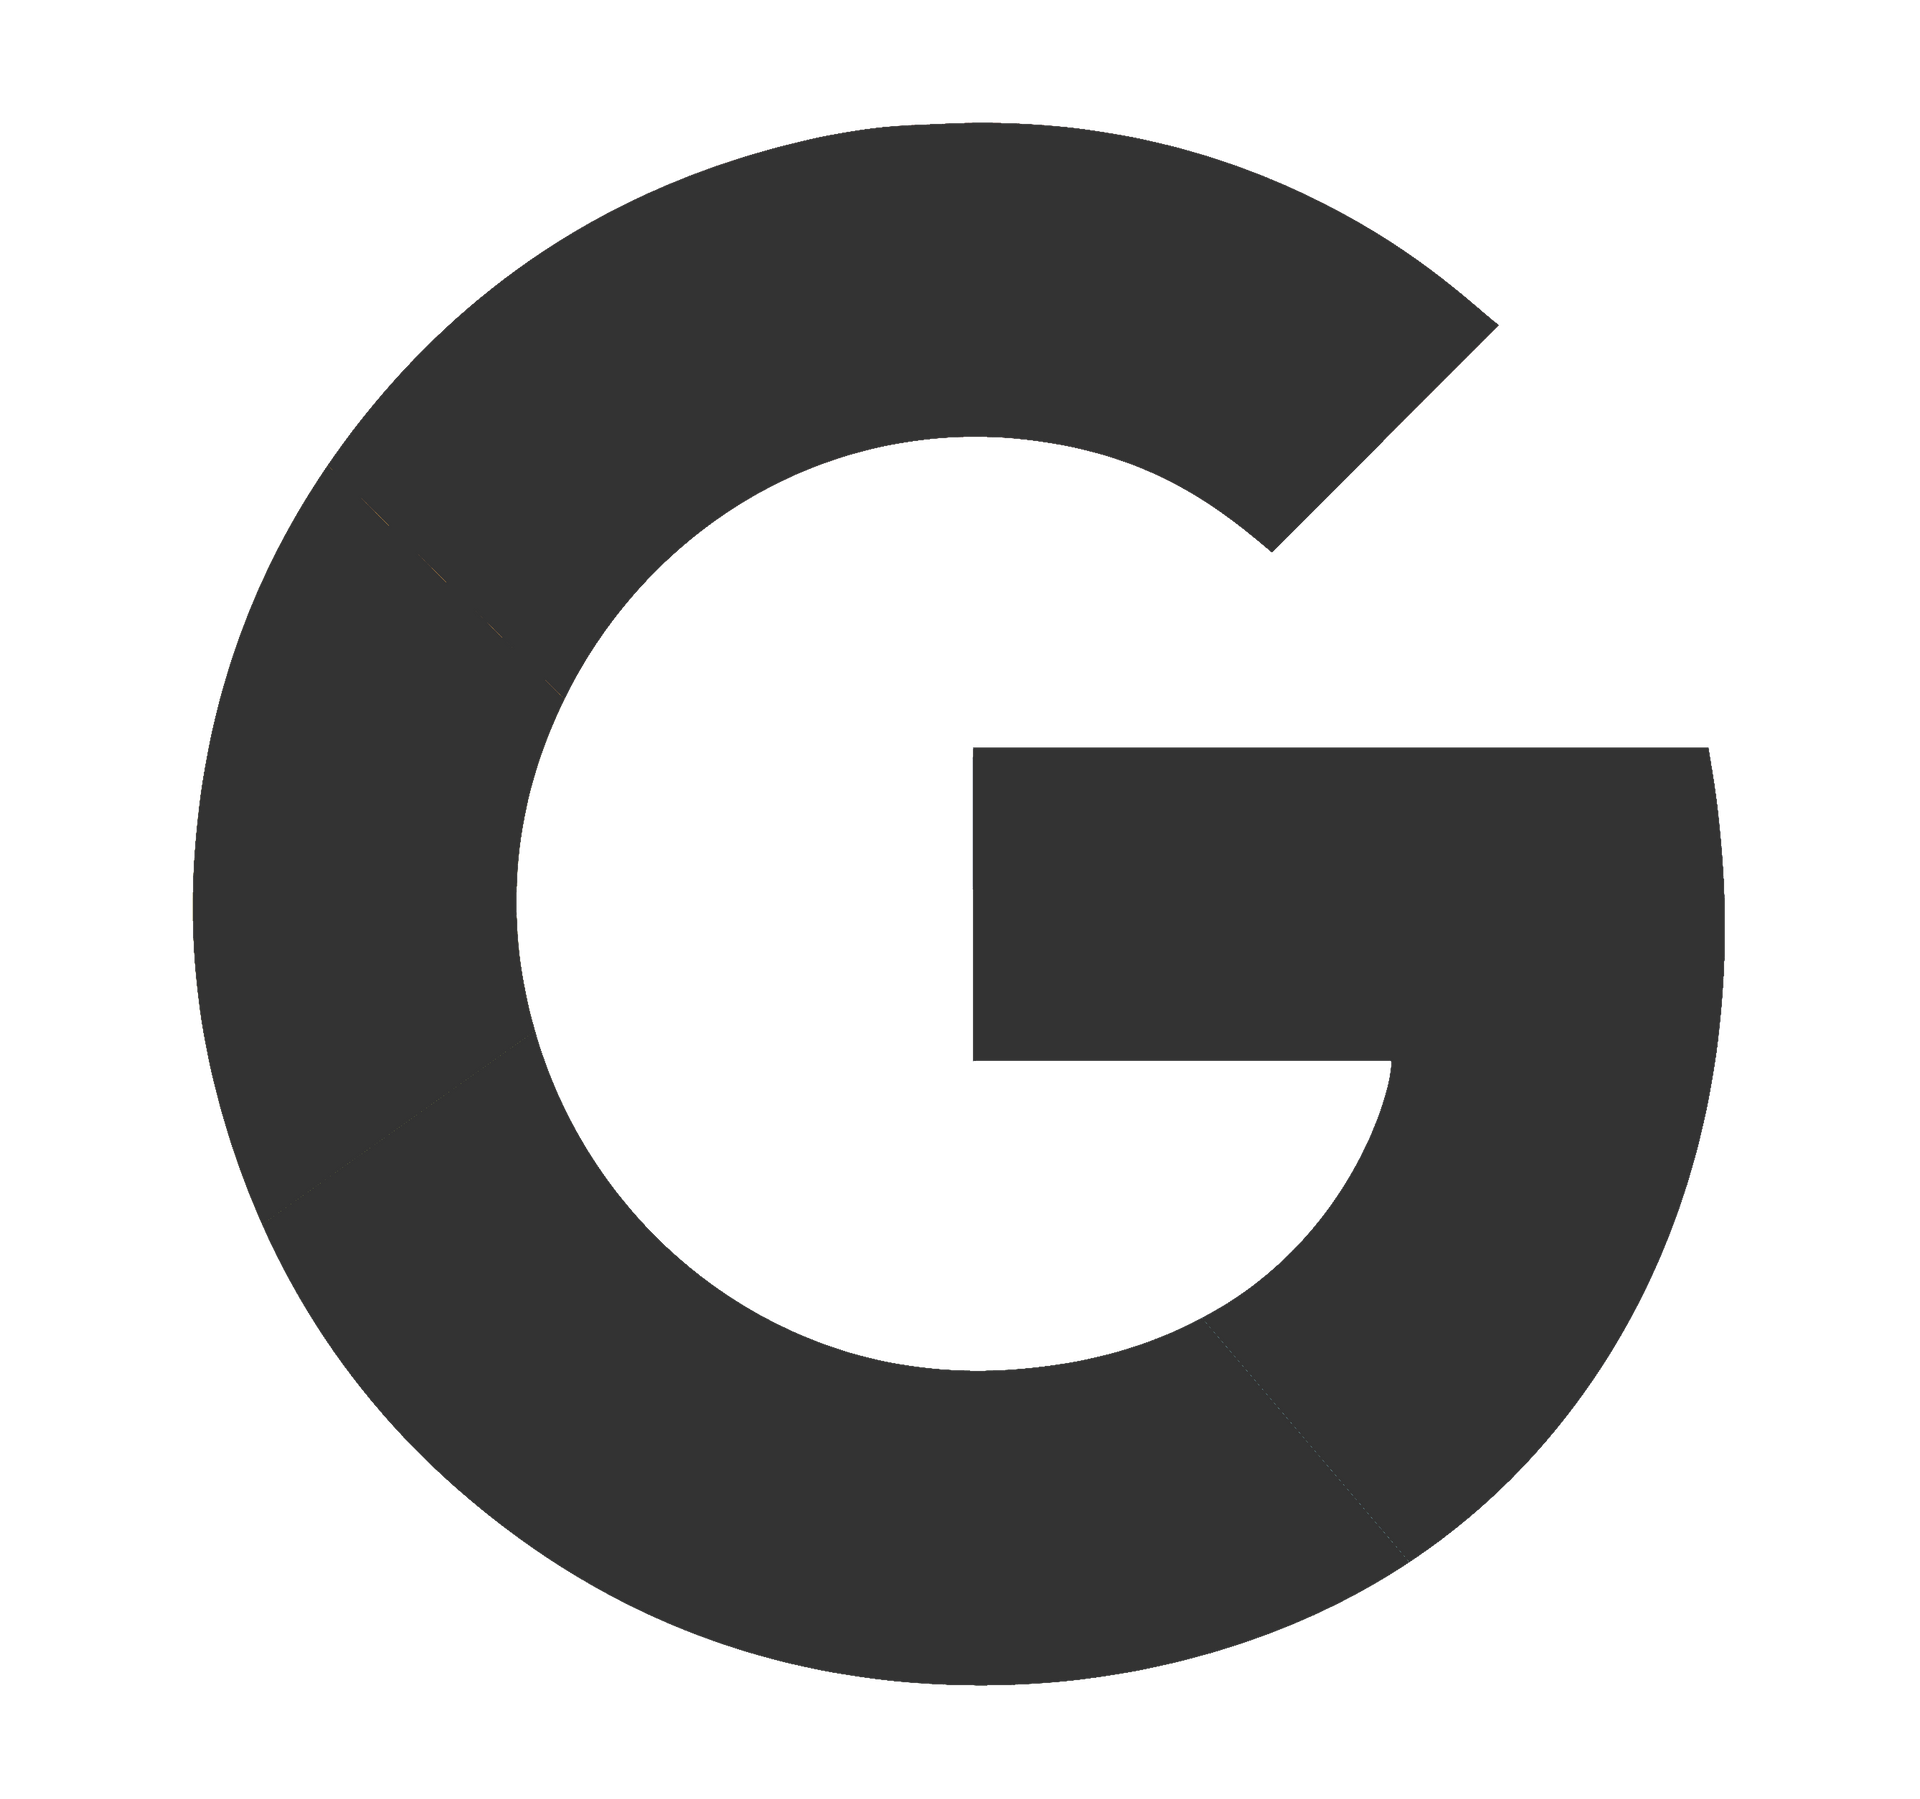 The letter g is in a circle on a white background.